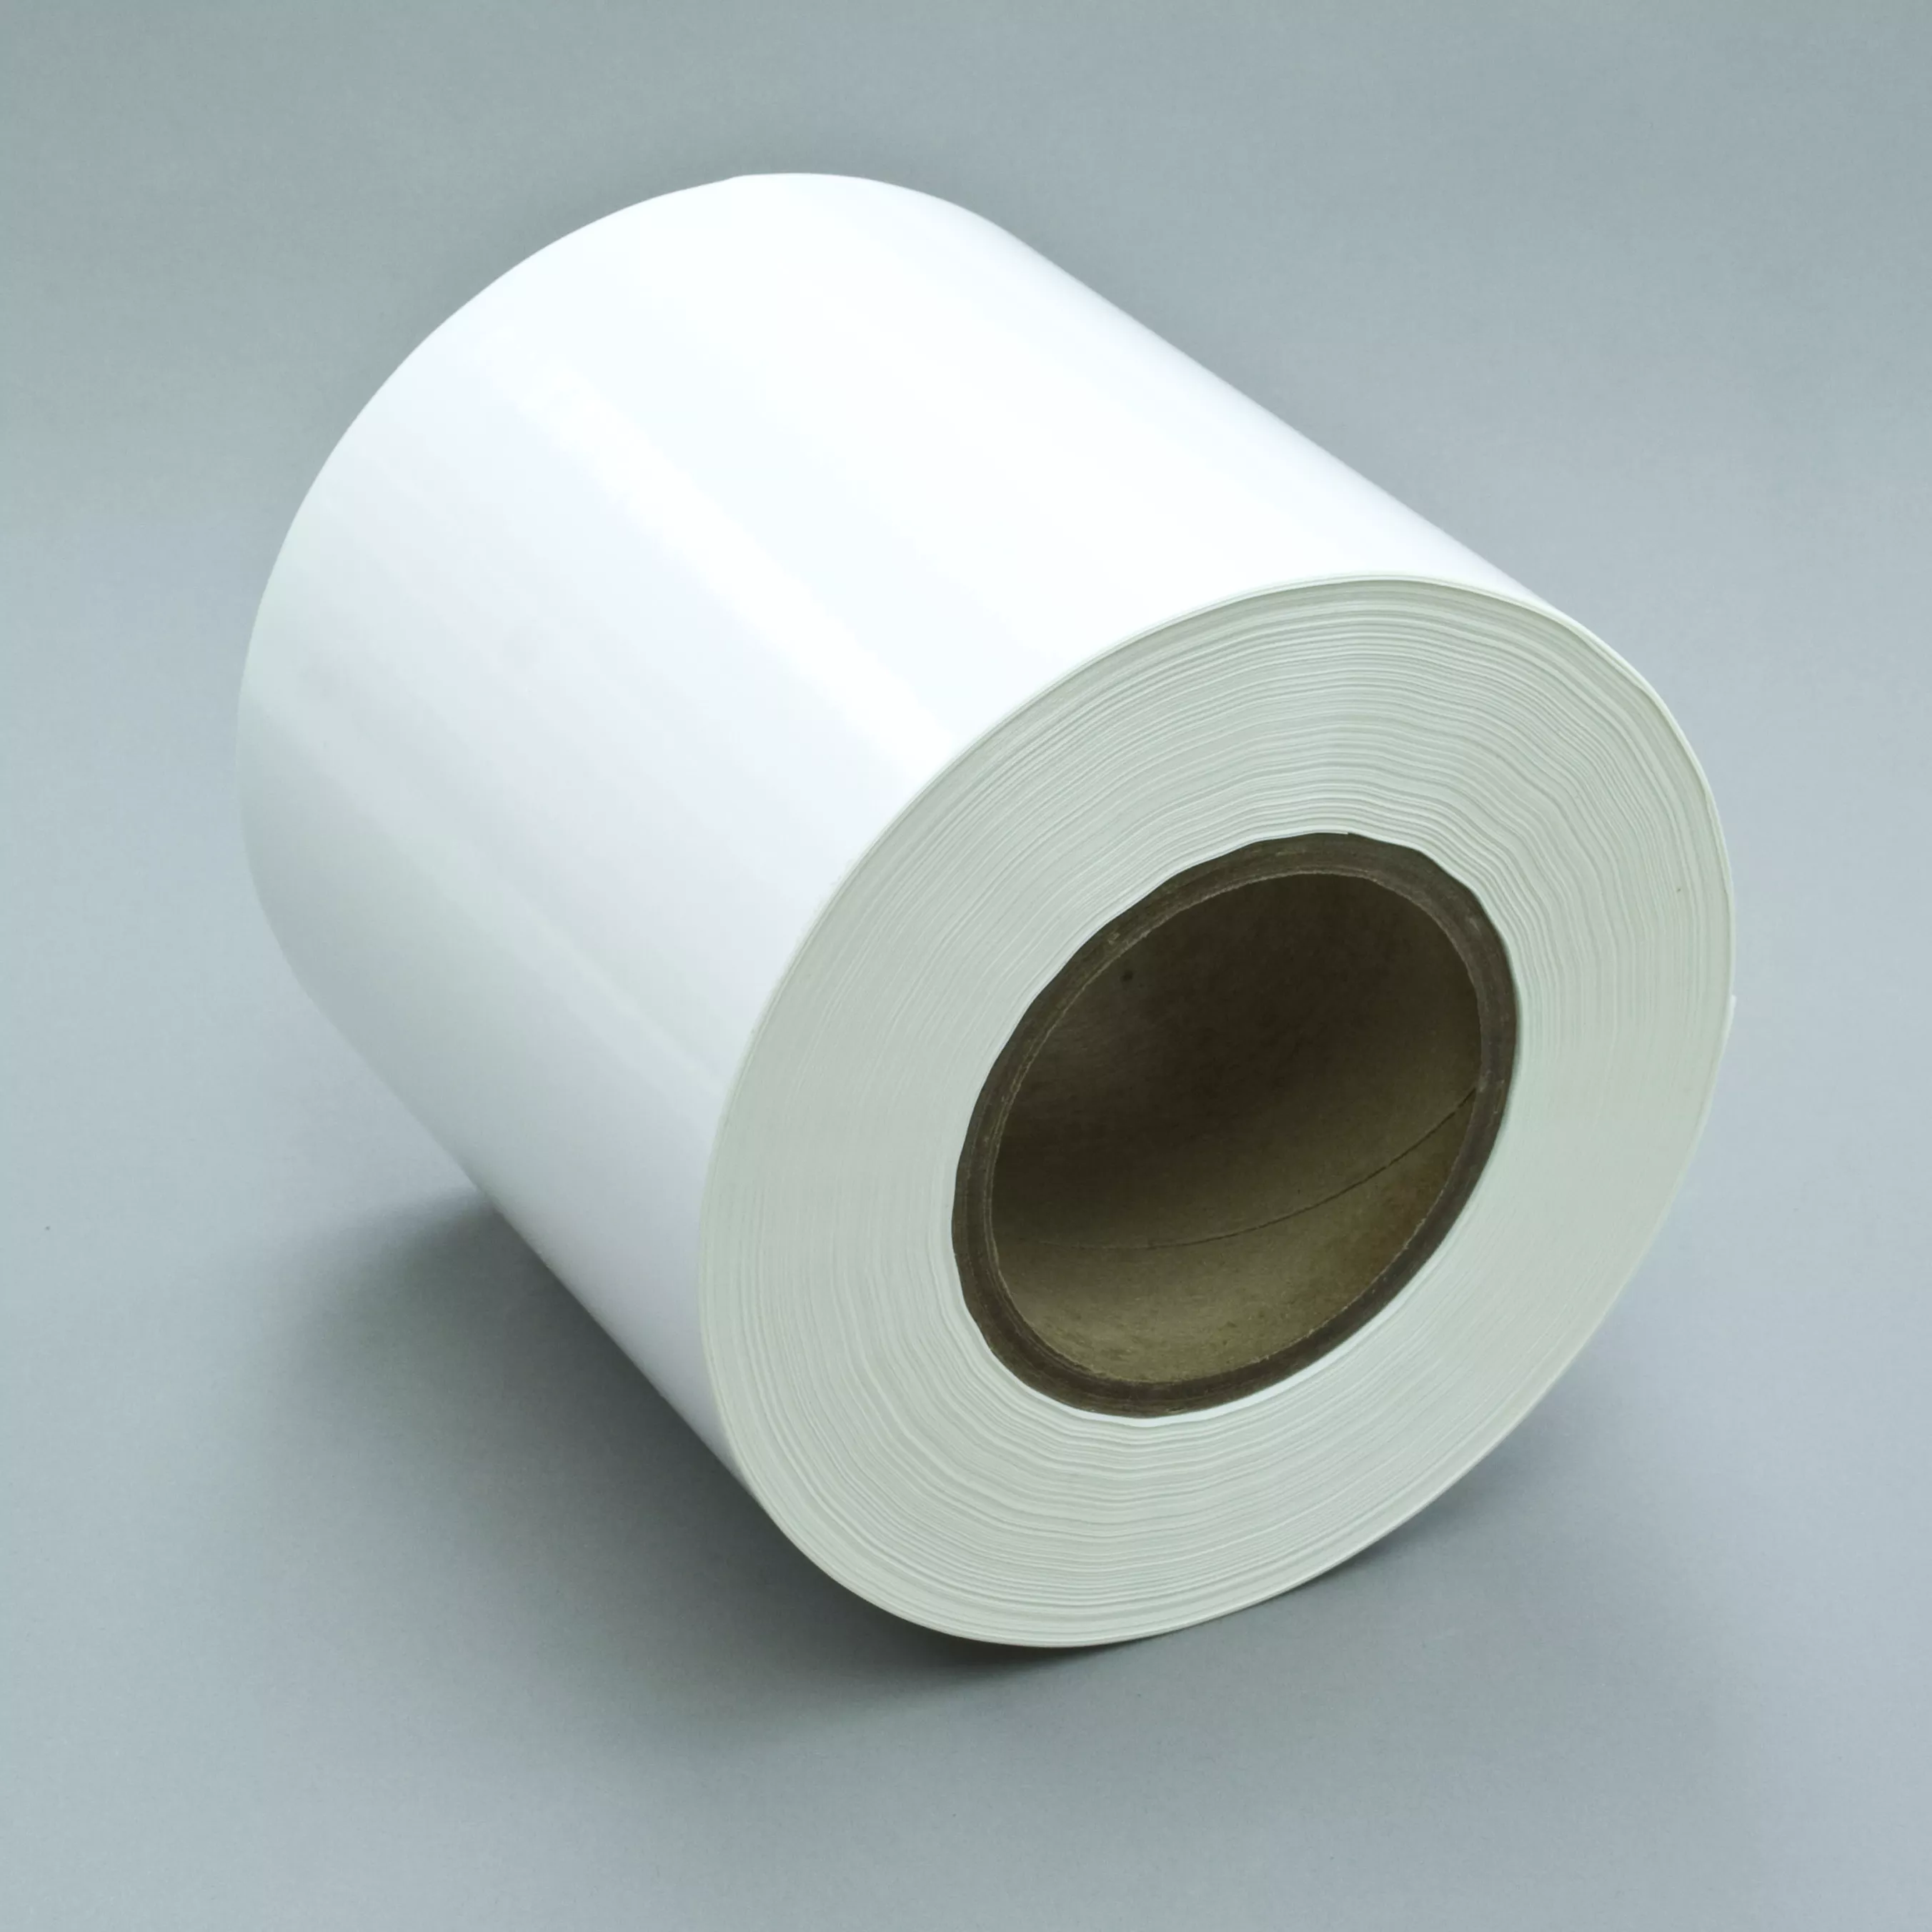 3M™ Sheet and Screen Label Material 7034, White Polyester, 20 in x 27
in, 100 Sheets/Case